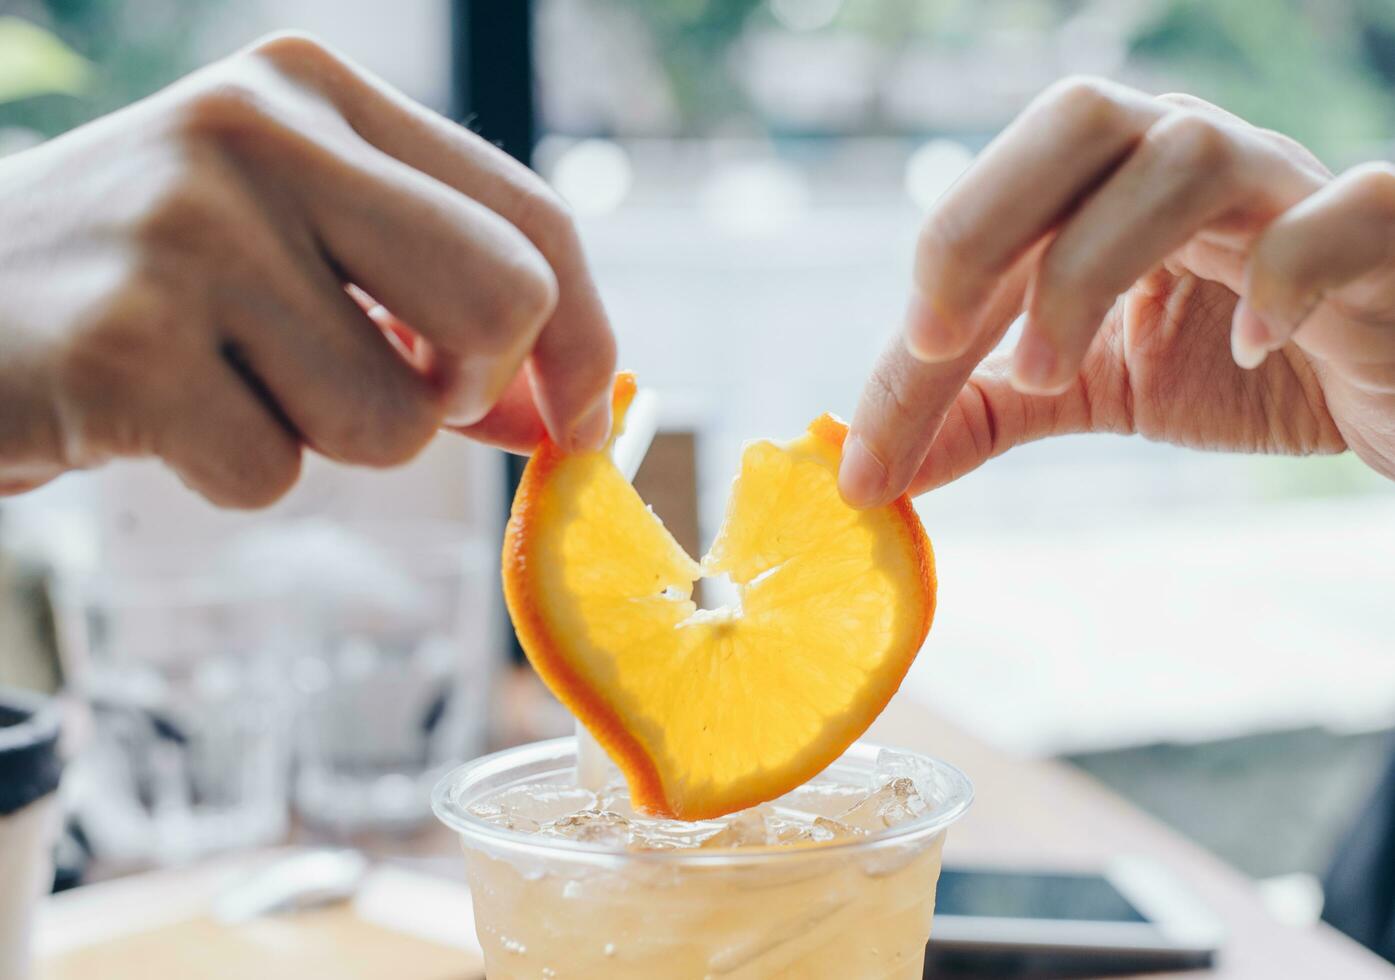 Human hands tearing a piece of orange. photo